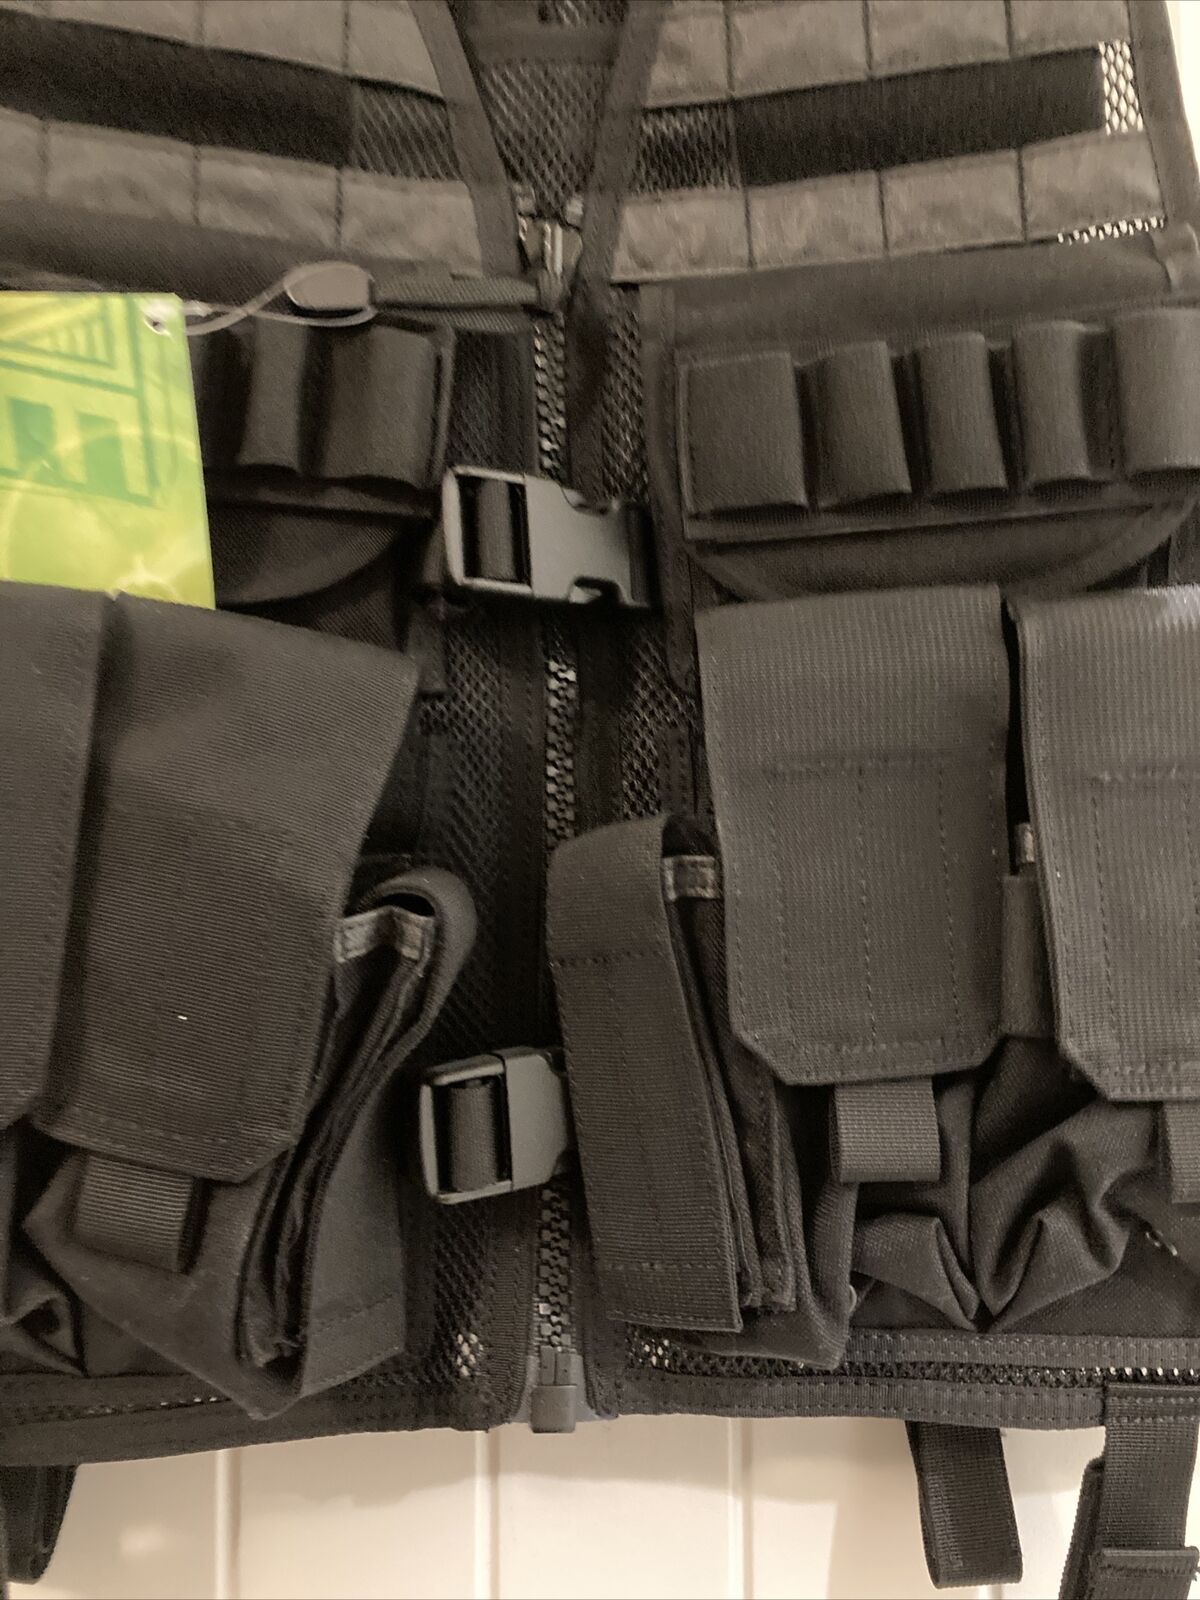 An Elite Survival Systems MVP Payload Tactical Vest with a lot of pockets on it.